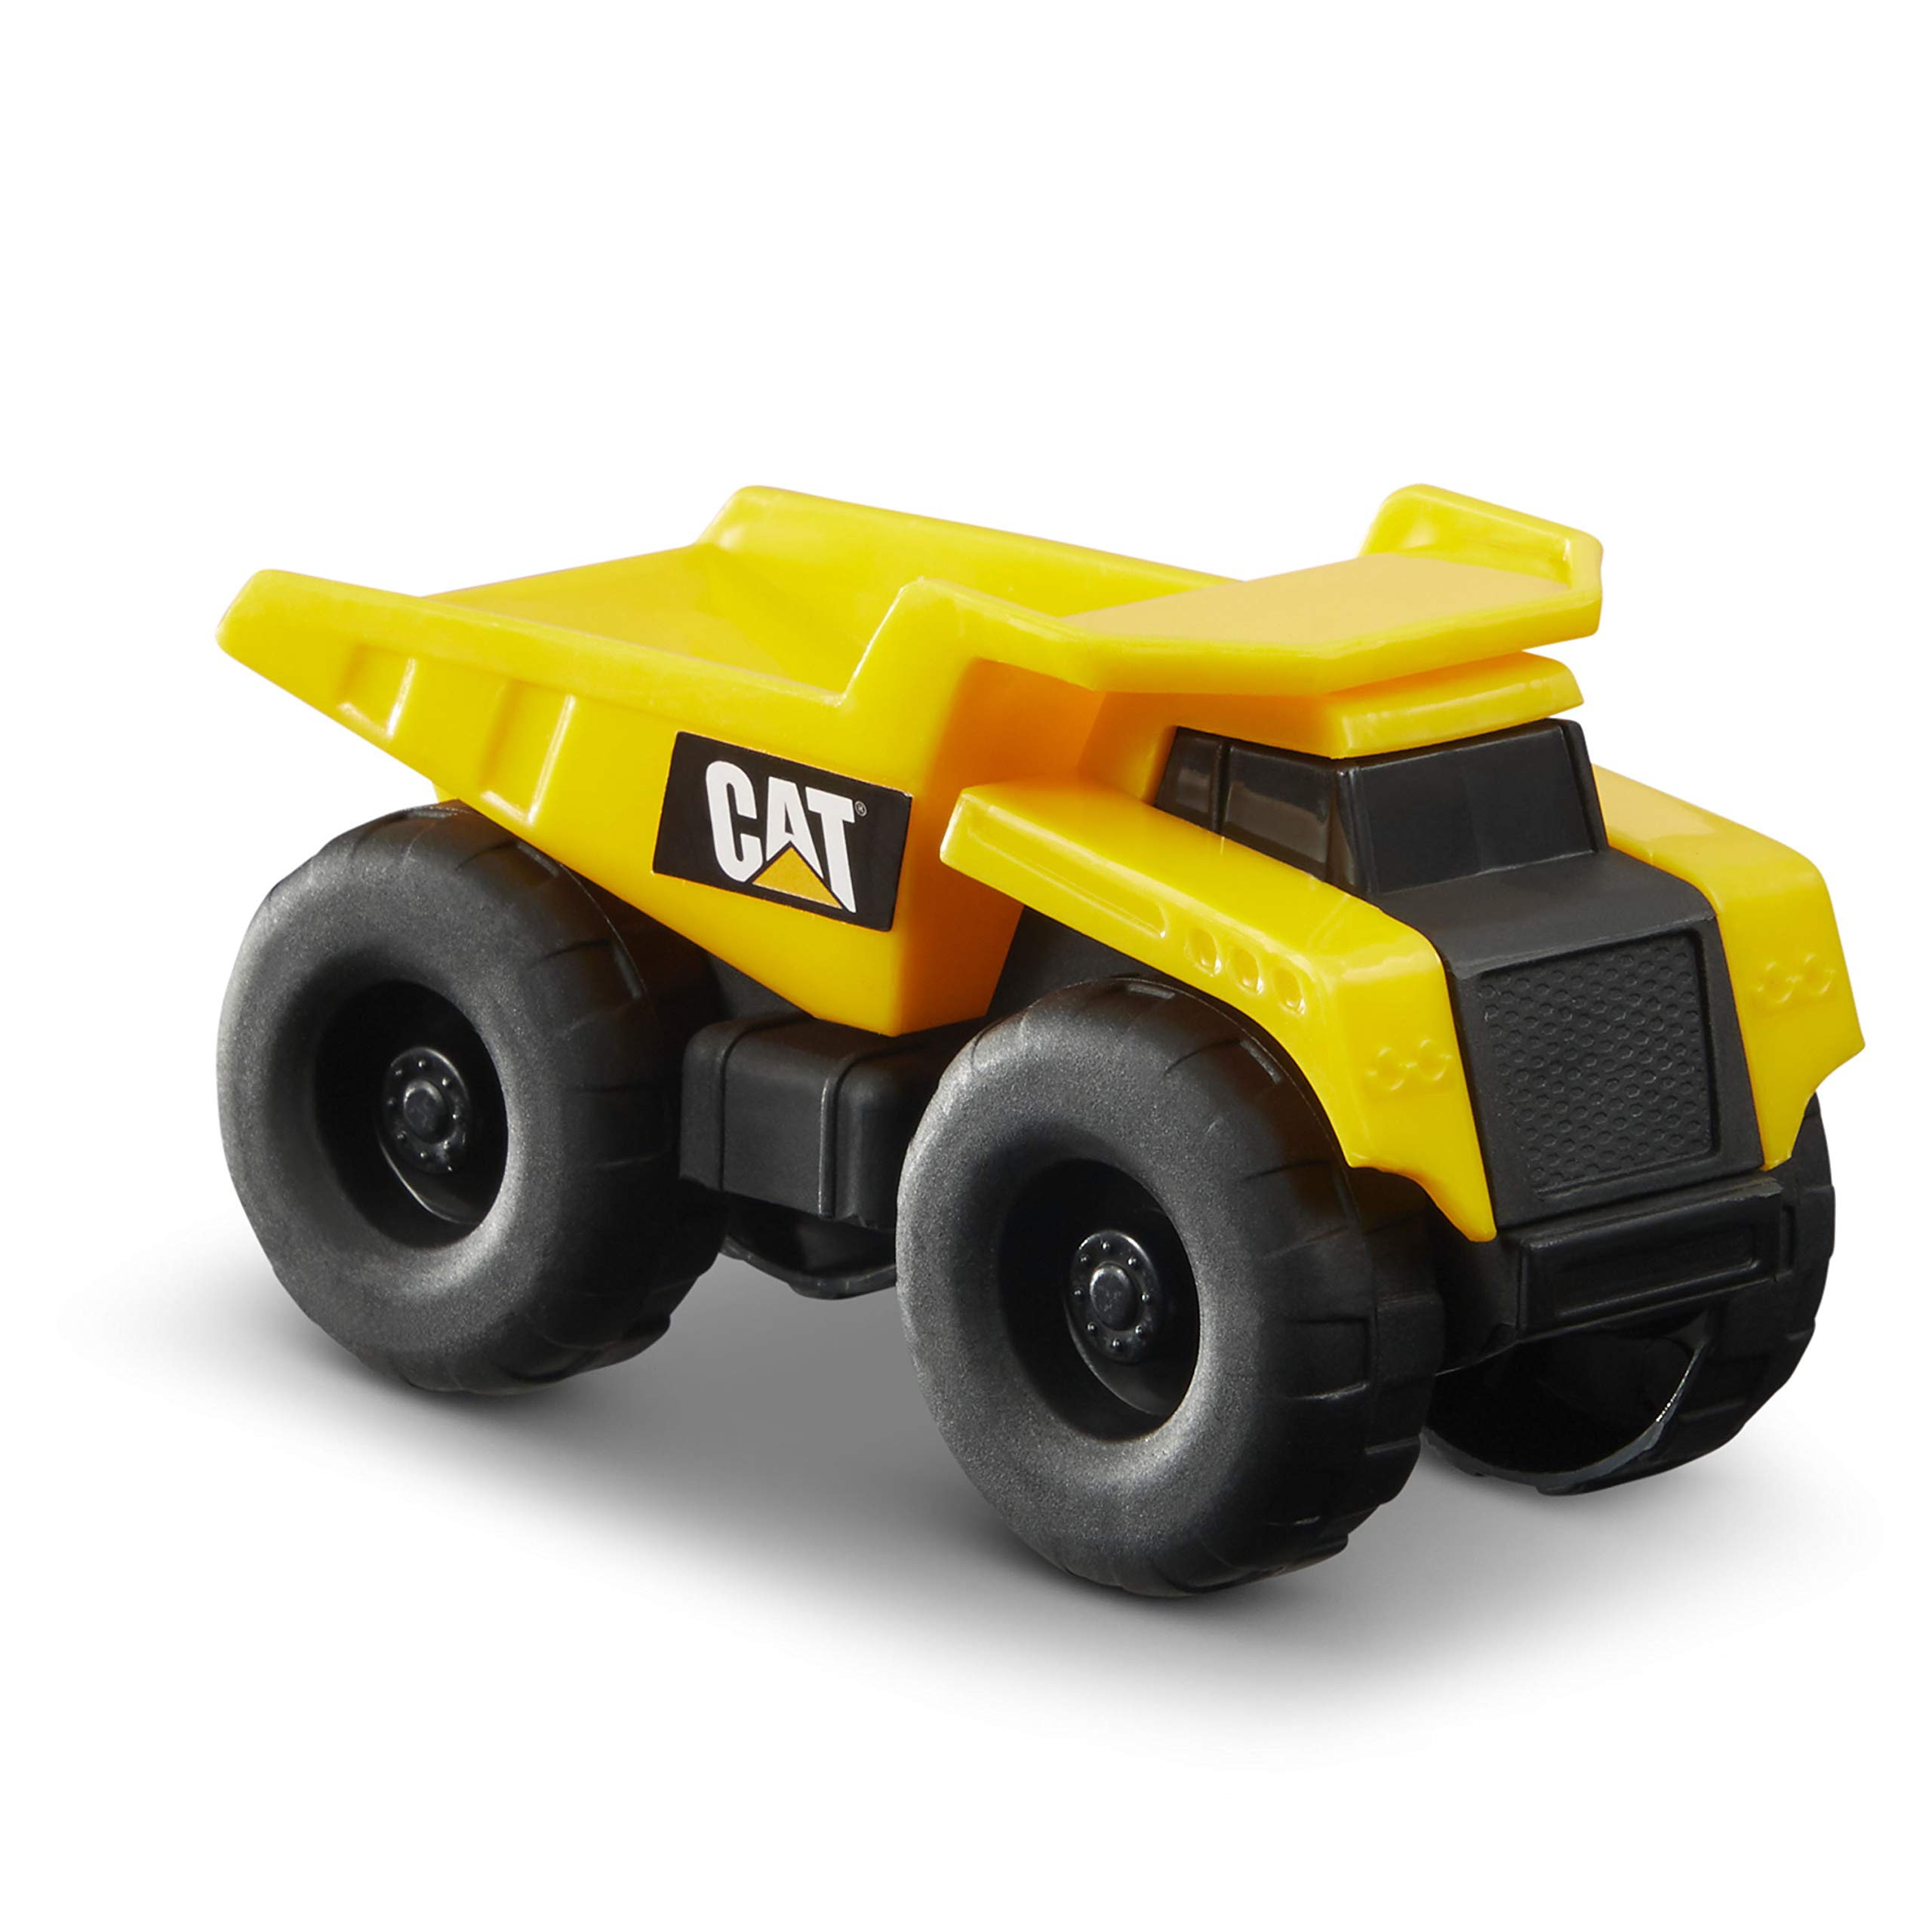 CatToysOfficial, CAT Little Machines Toys with 5pcs - Dump Truck, Wheel Loader, Bulldozer, Backhoe, and Excavator Vehicles, Cake Toppers, Playset for Kids Ages 3 and up,Yellow